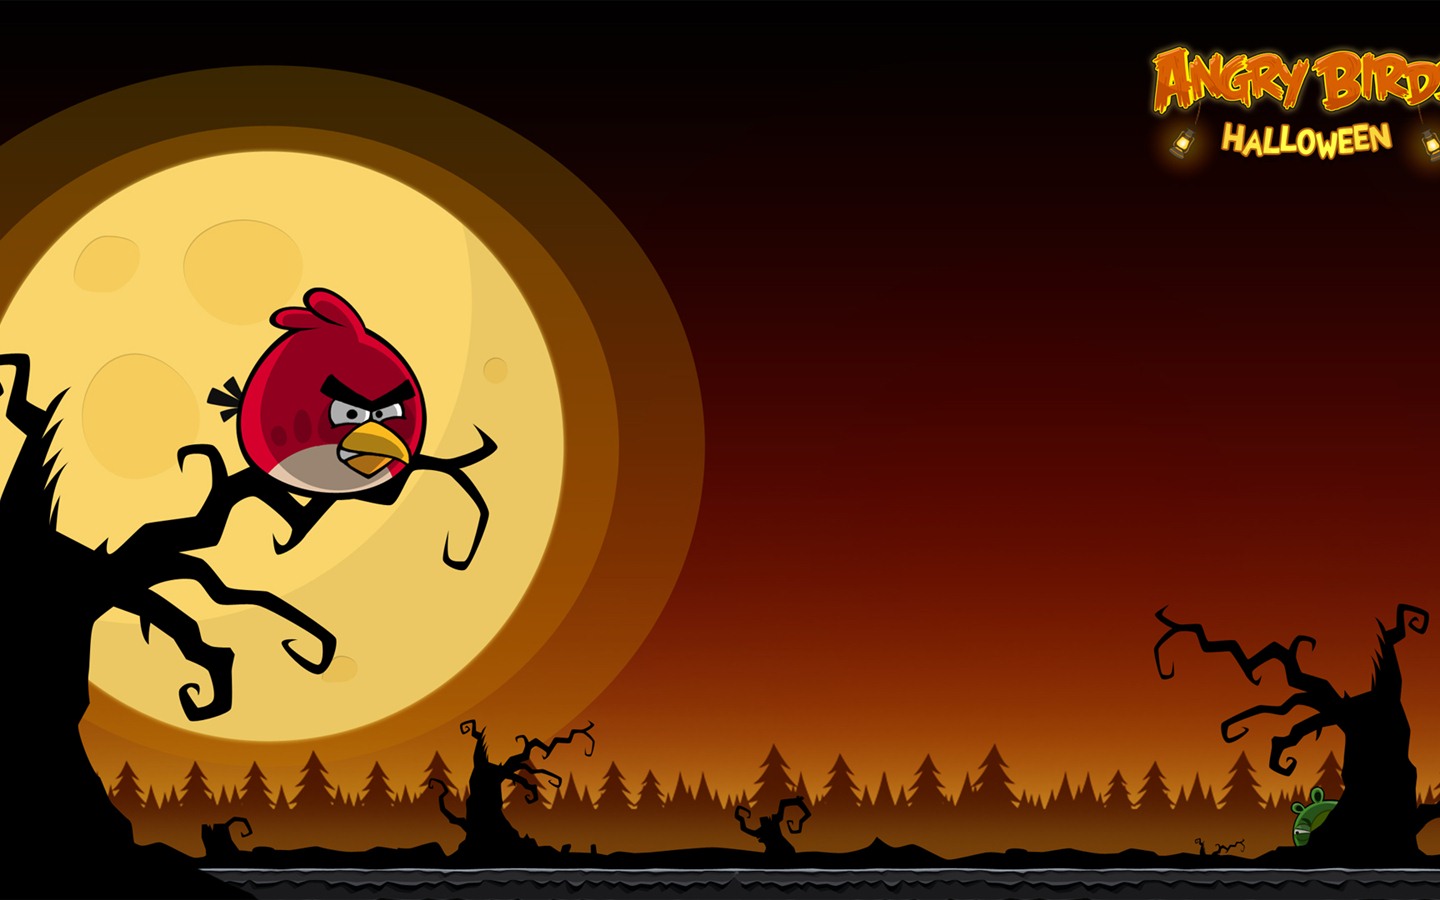 Angry Birds Spiel wallpapers #26 - 1440x900